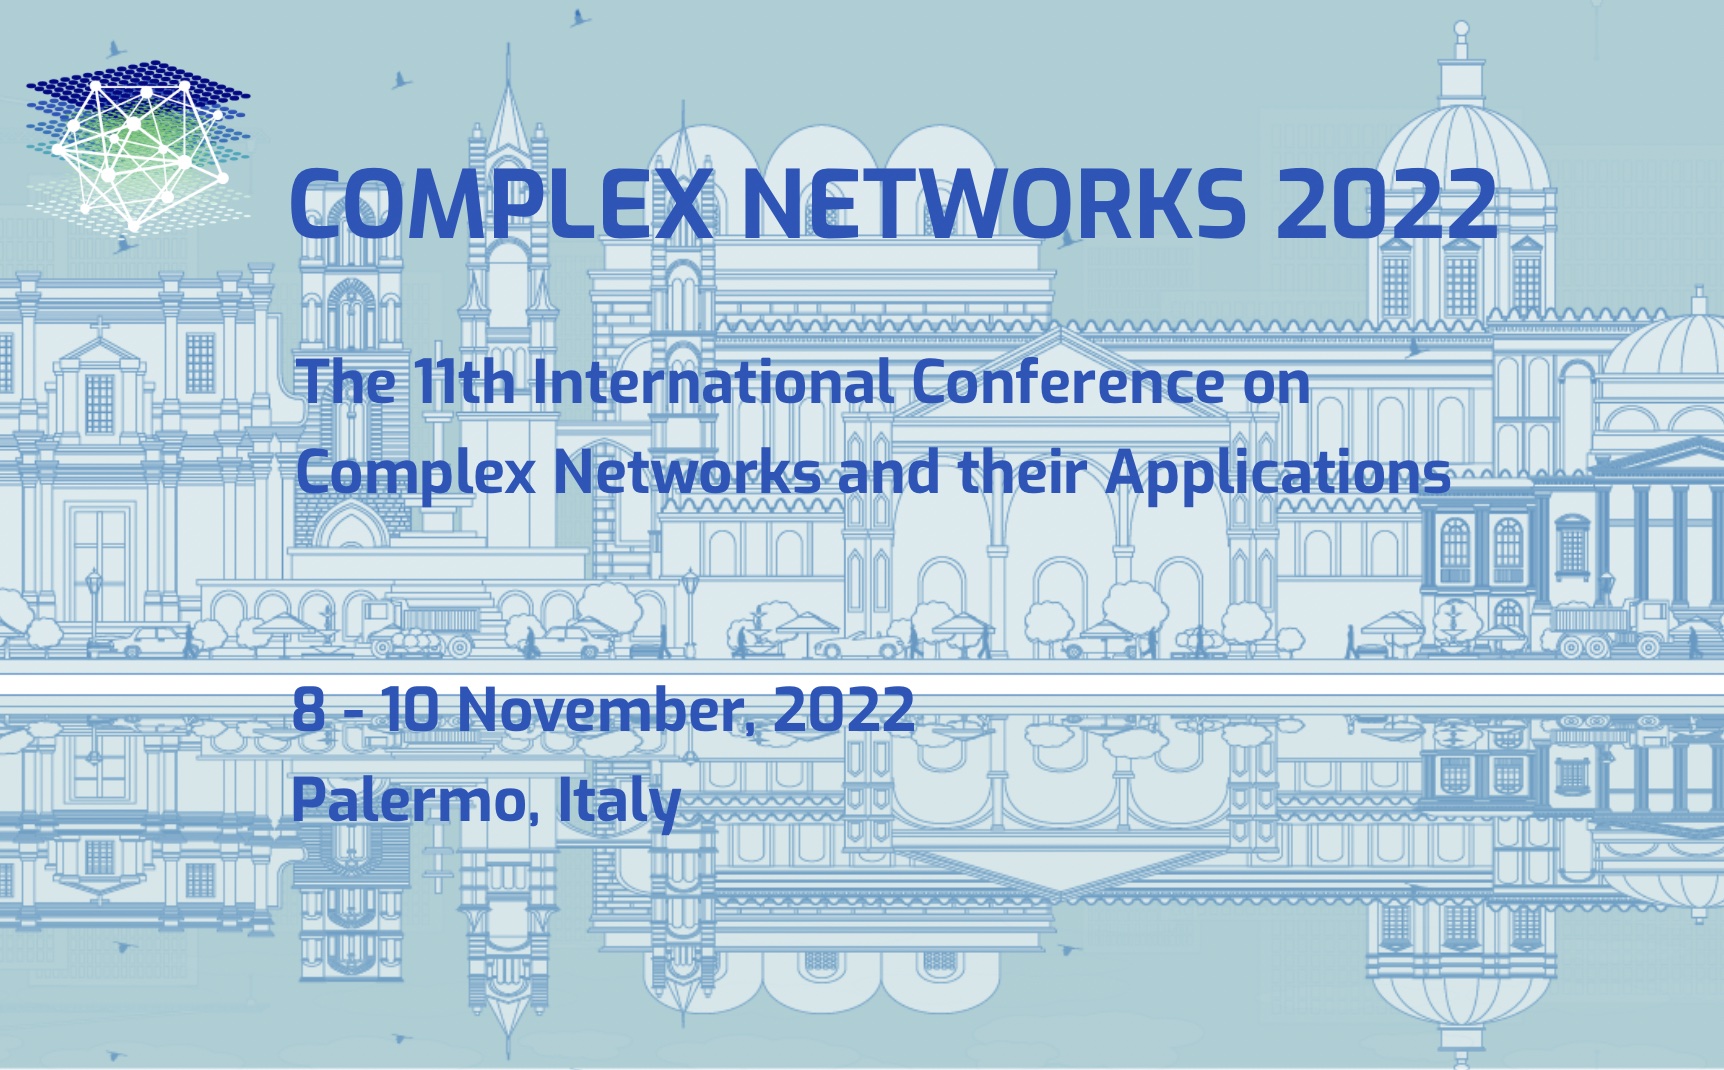 Complex Networks 2022, Palermo, Italy